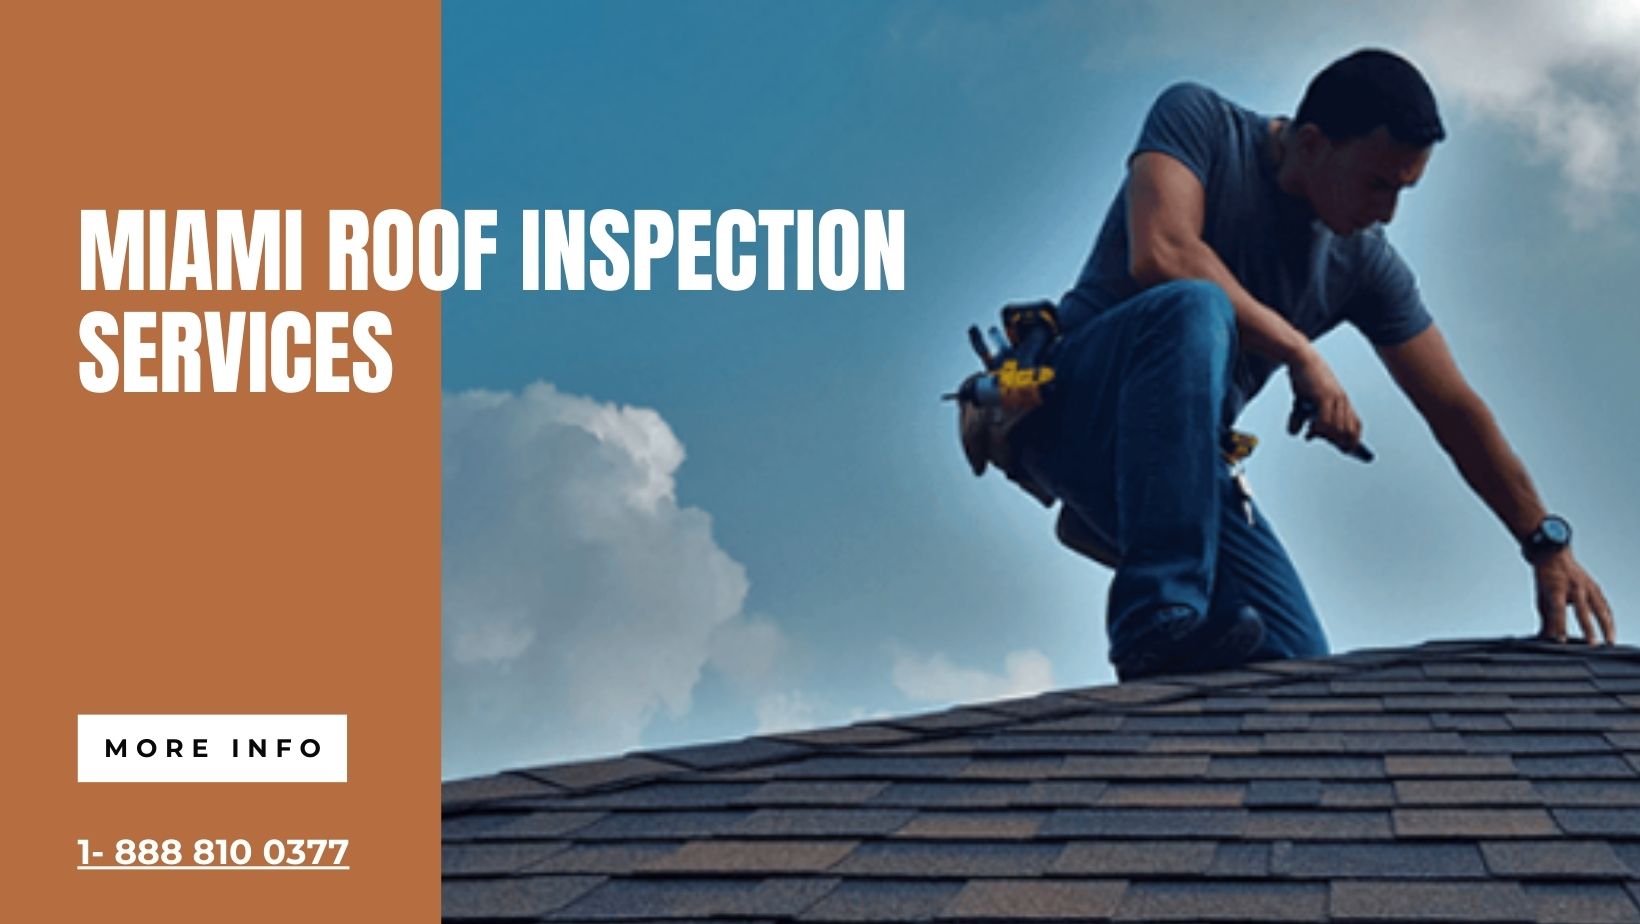 Miami Roof Inspection Services